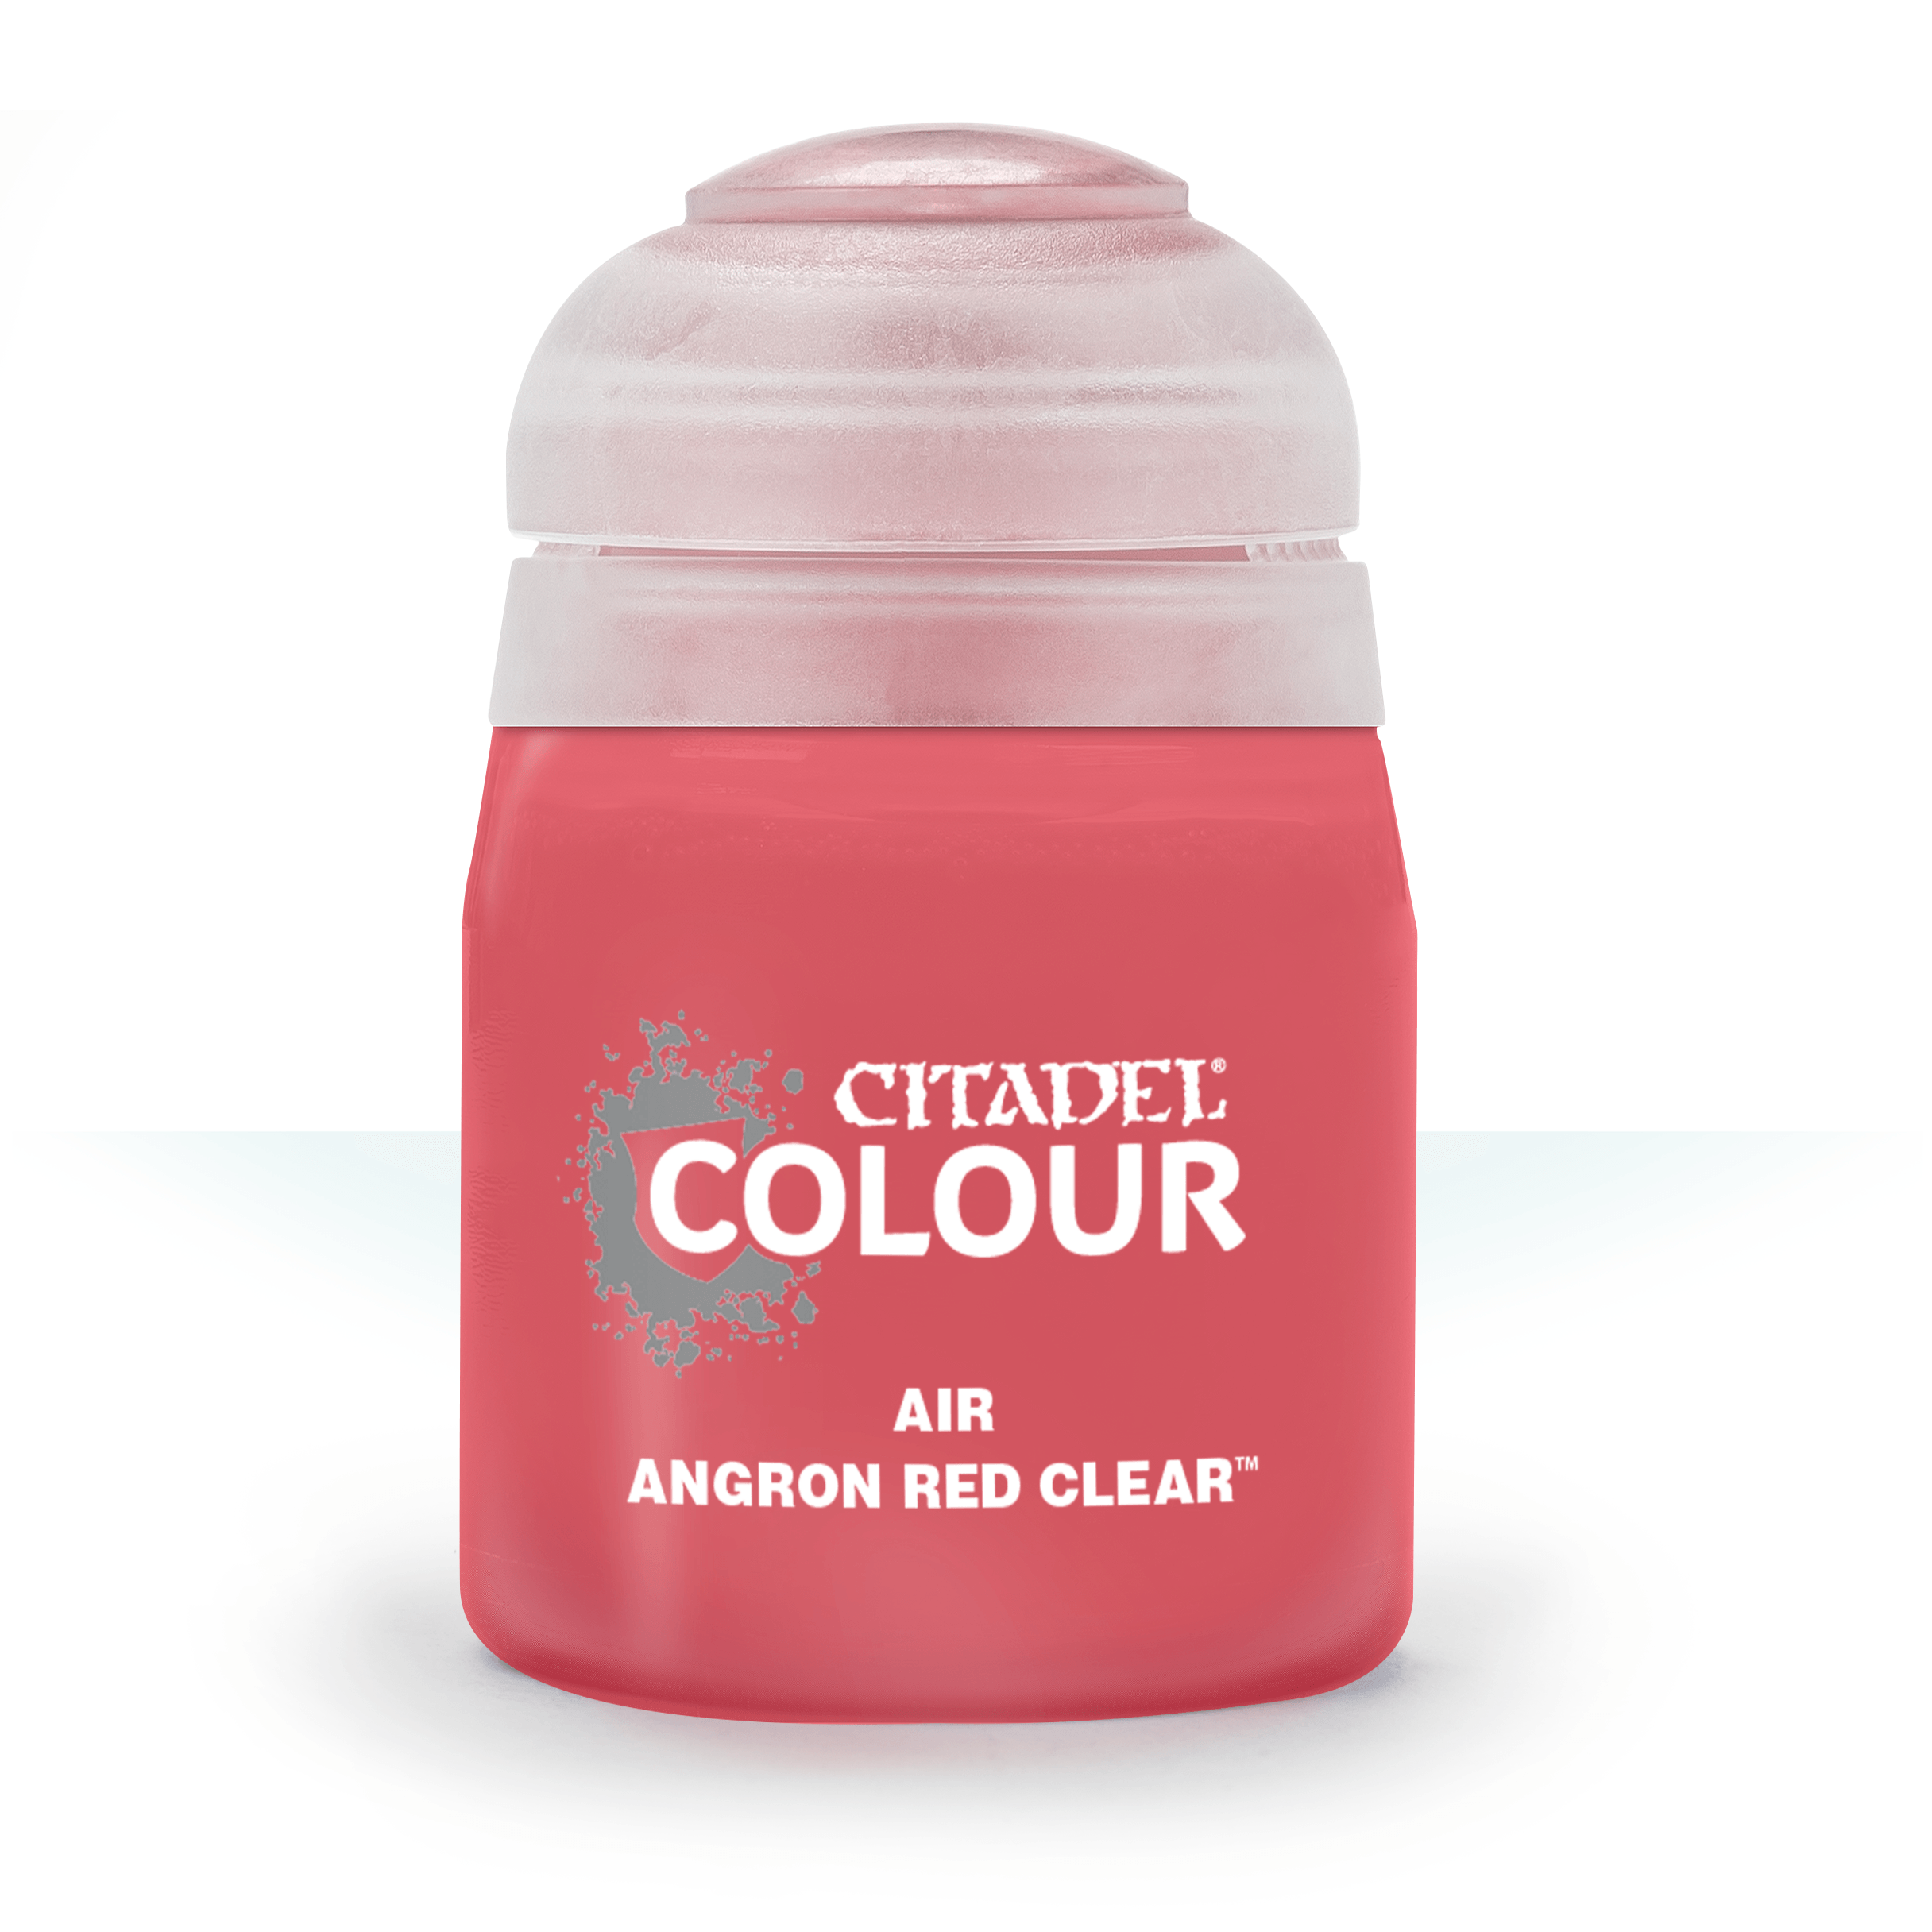 Citadel: Angron Red Clear